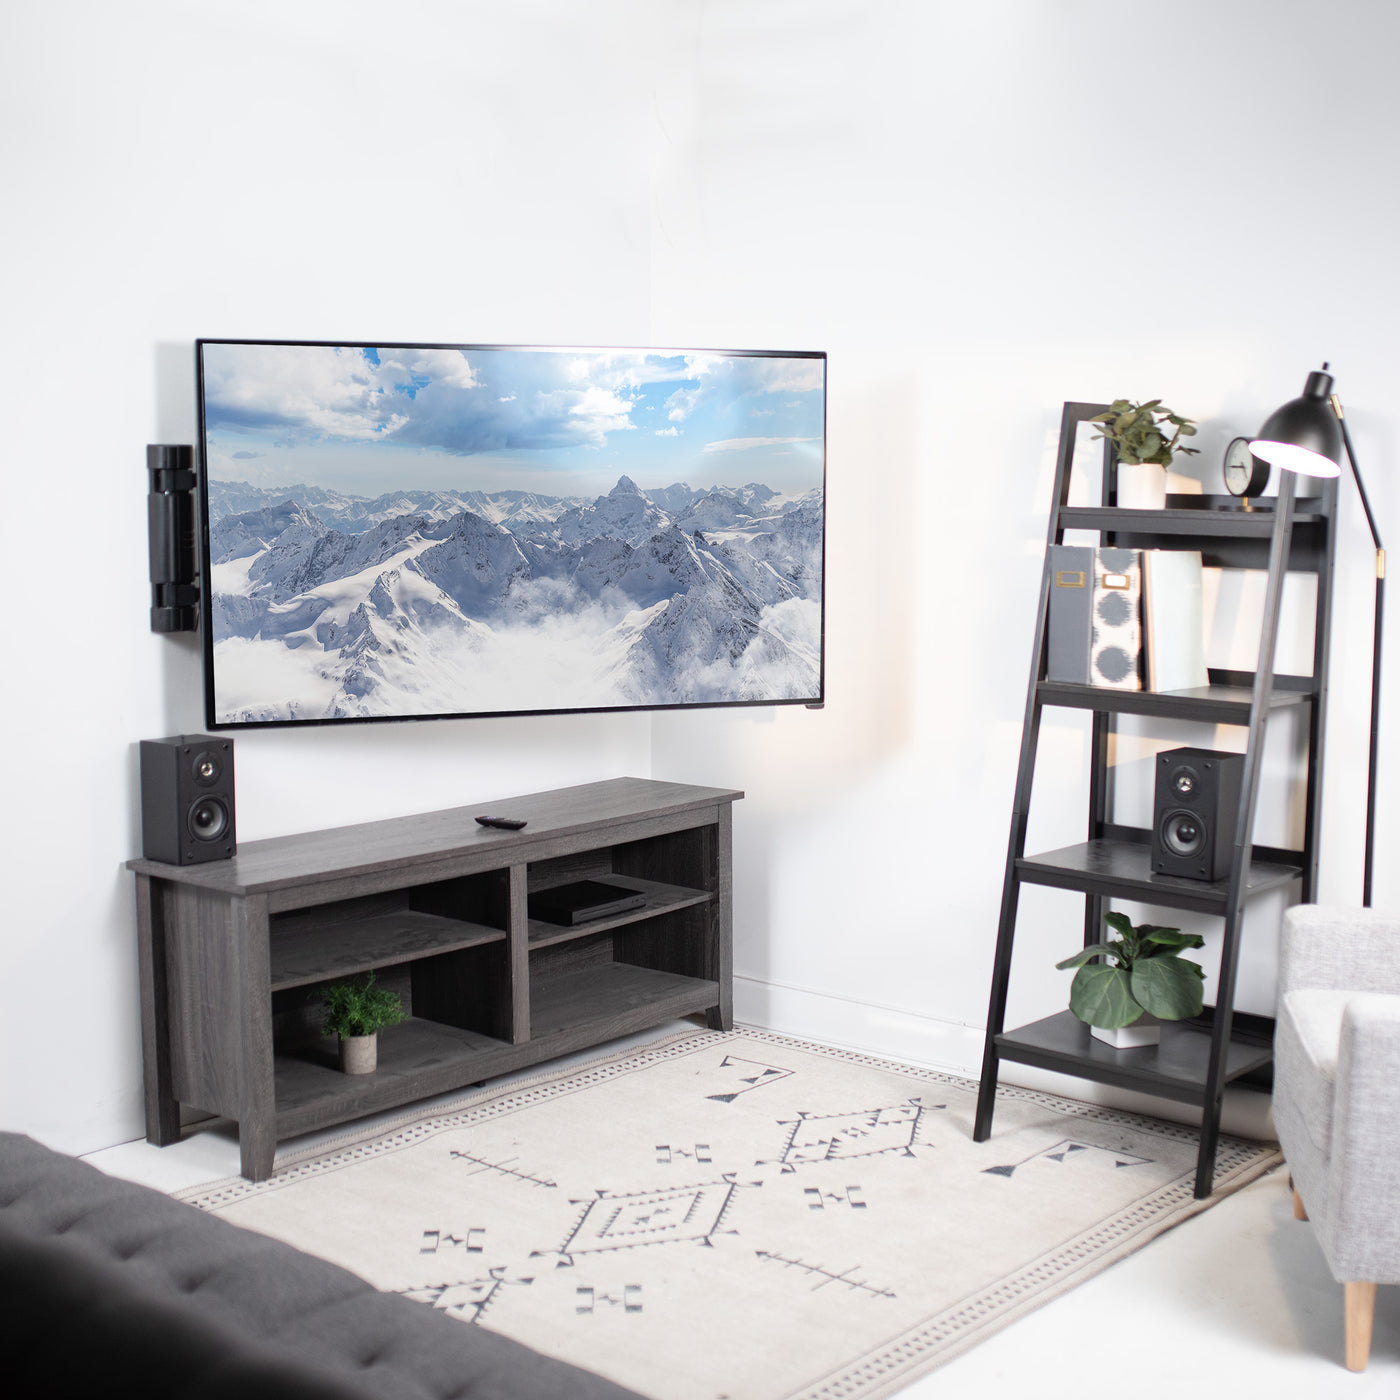 Side extending TV mount supporting large screen TVs in a modern home space.